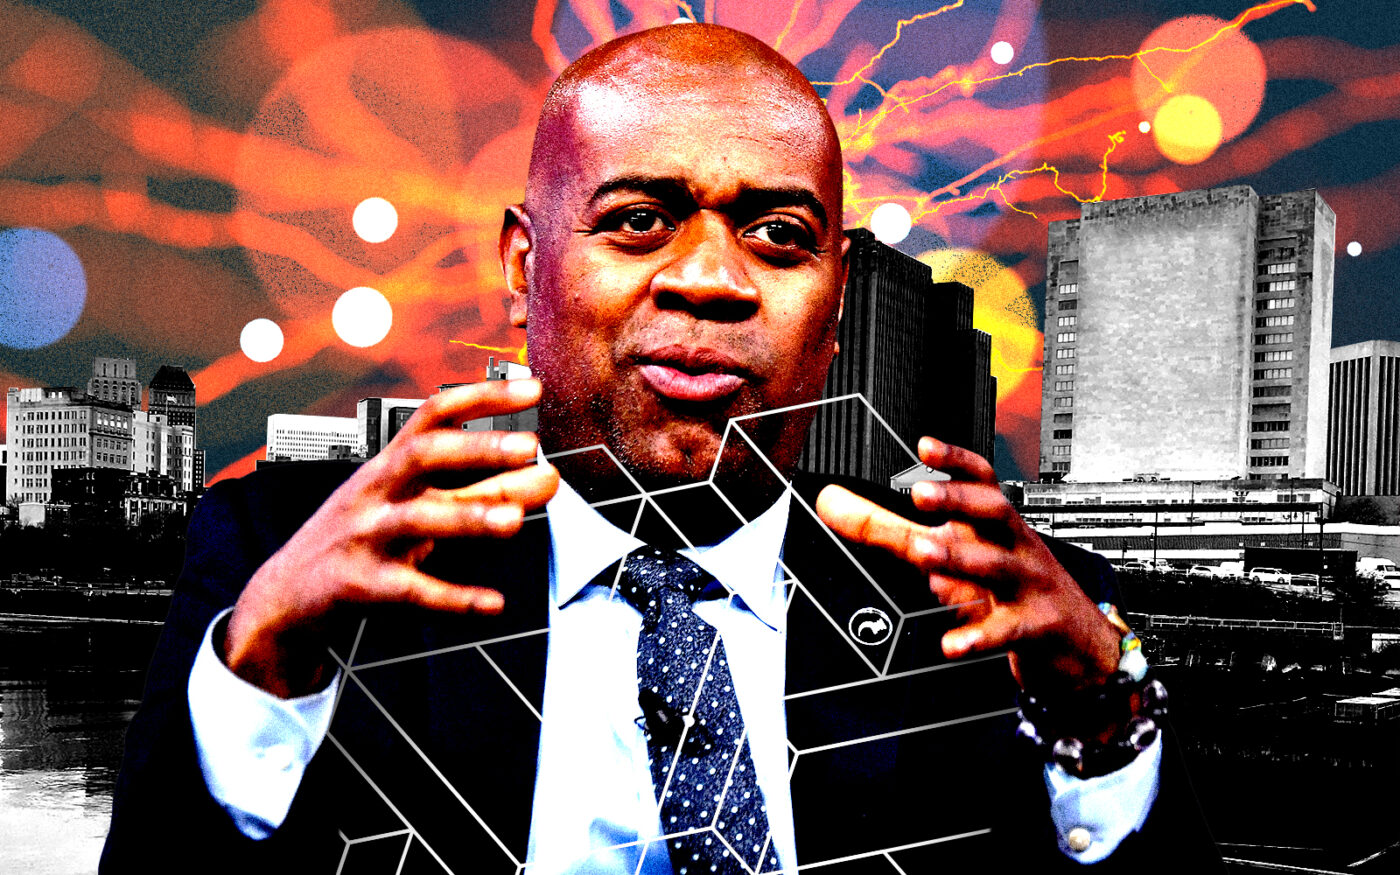 Mayor of Newark Ras J. Baraka (Photo Illustration by Steven Dilakian for The Real Deal with Getty)